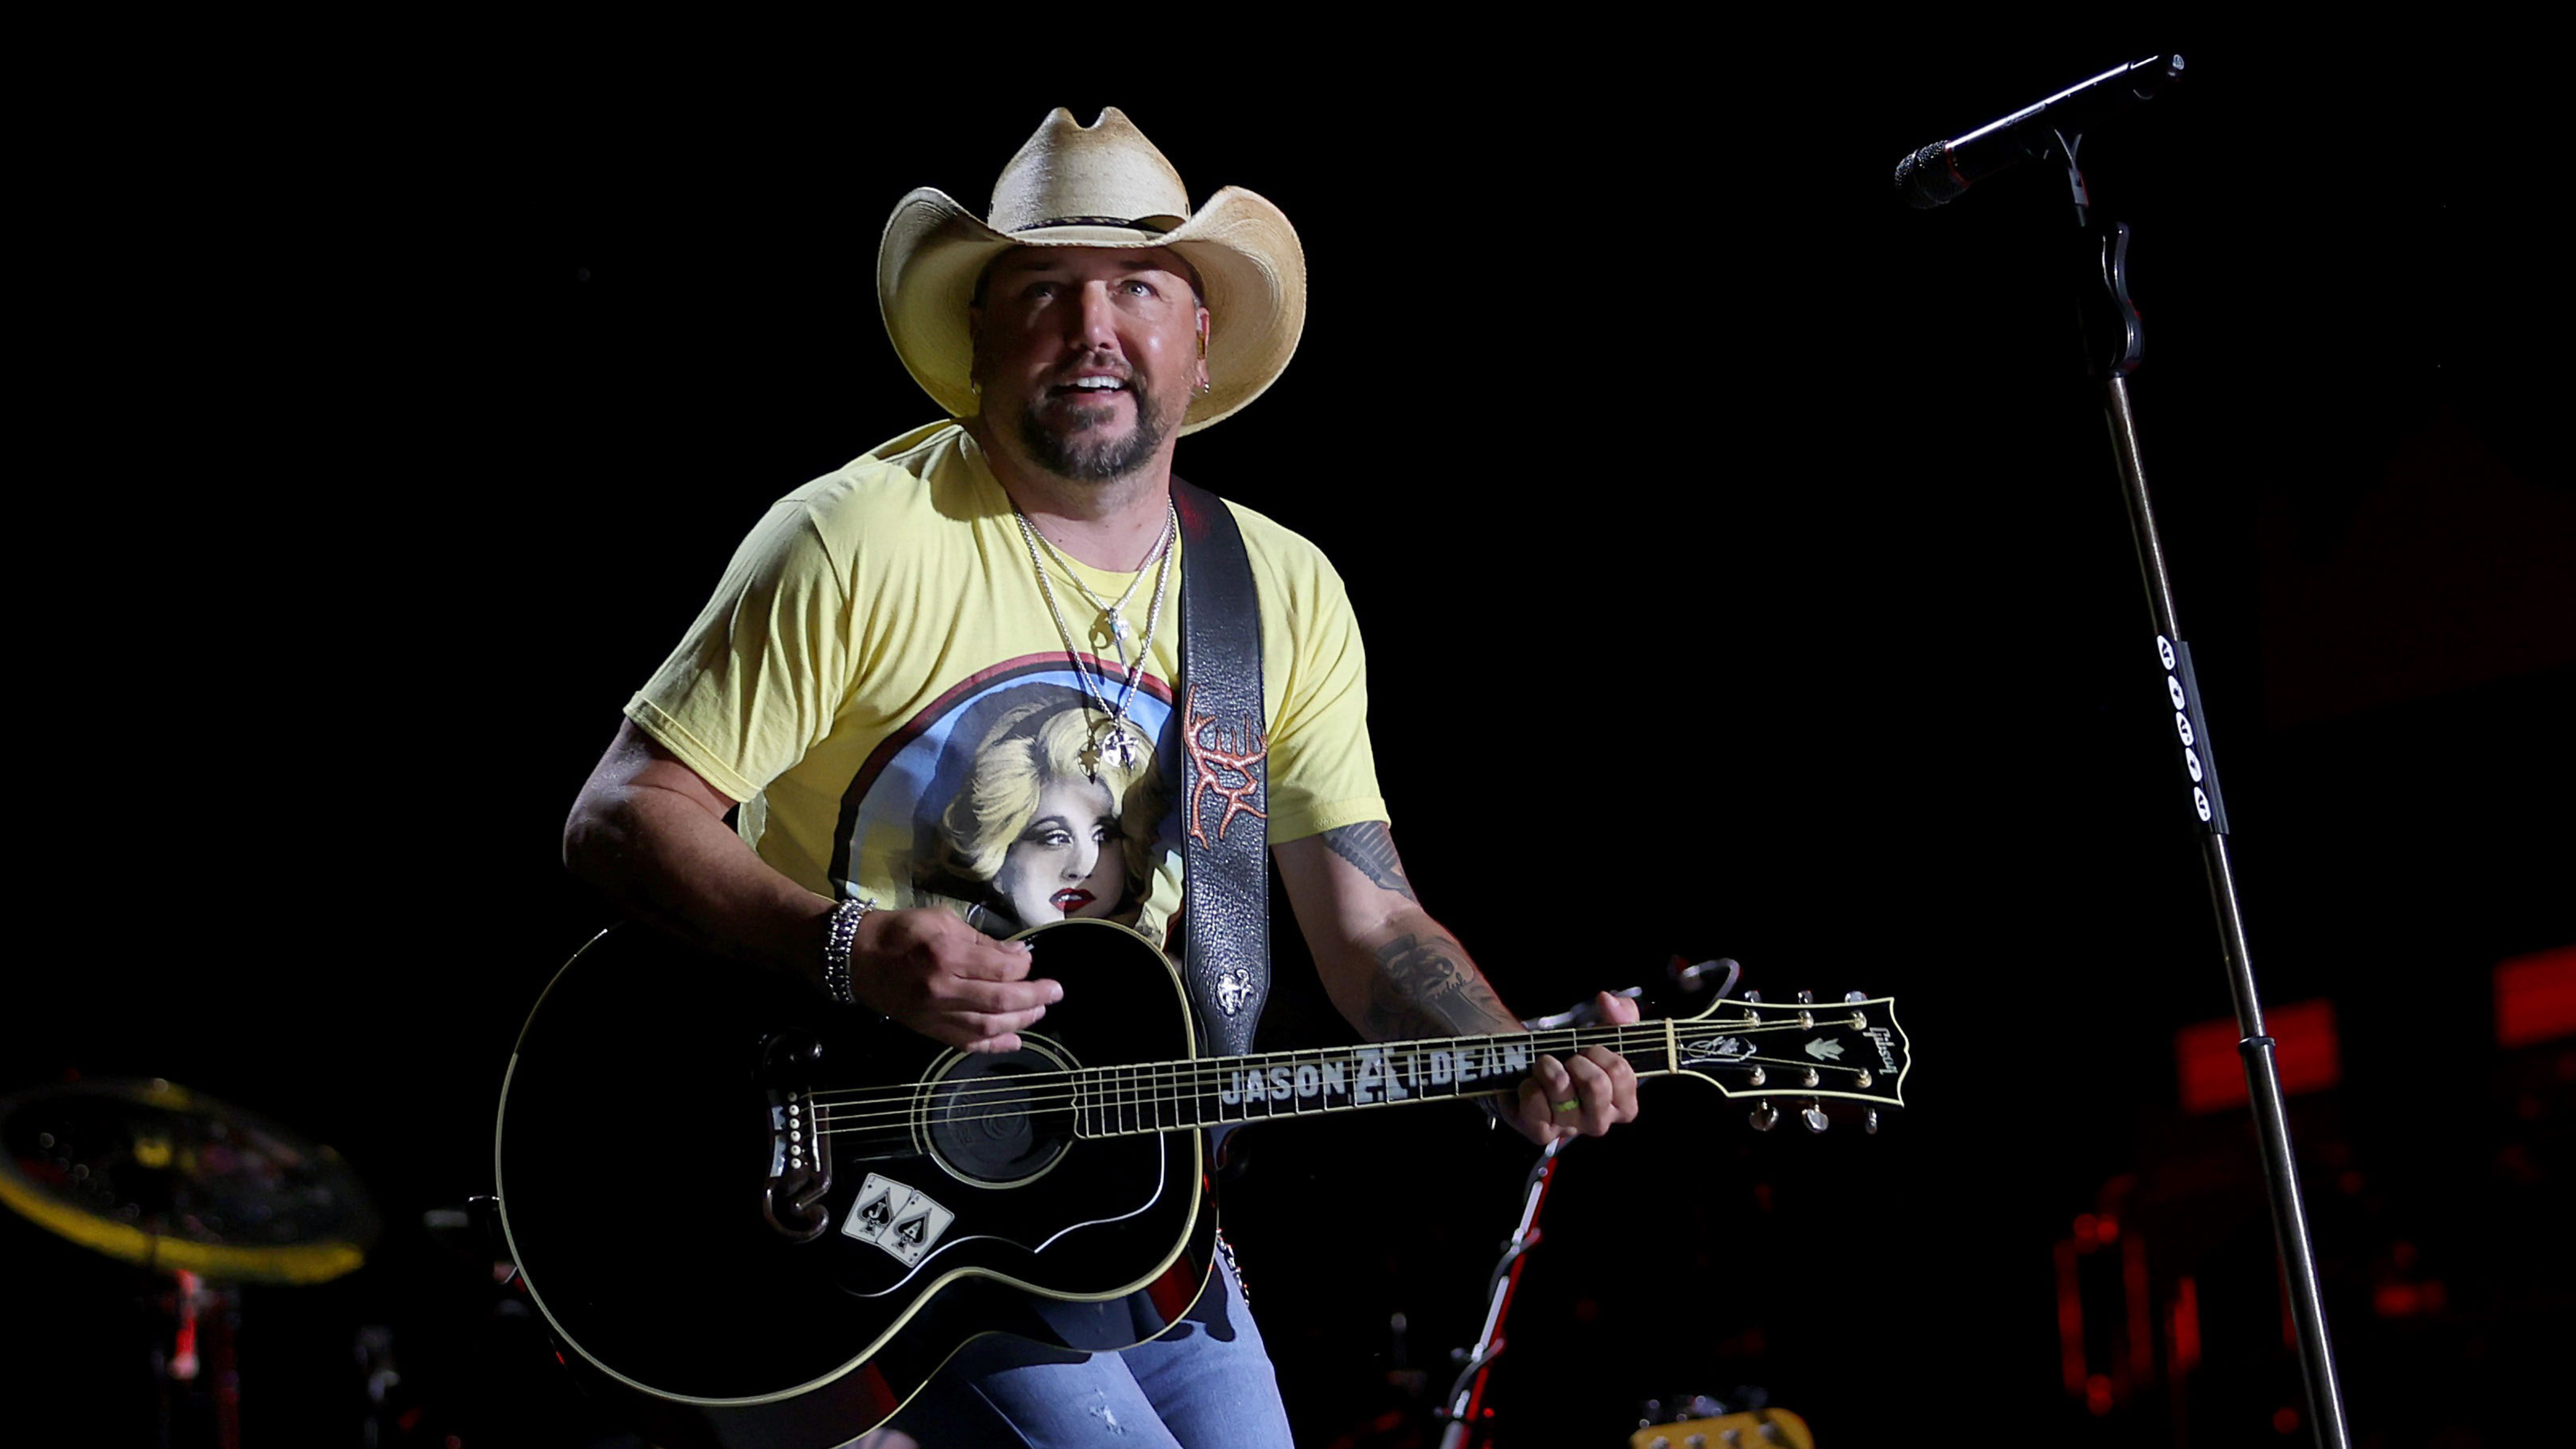 NASHVILLE, TENNESSEE - JUNE 09: Jason Aldean performs during day 1 of CMA Fest 2022 at Nissan Stadium on June 09, 2022 in Nashville, Tennessee. 